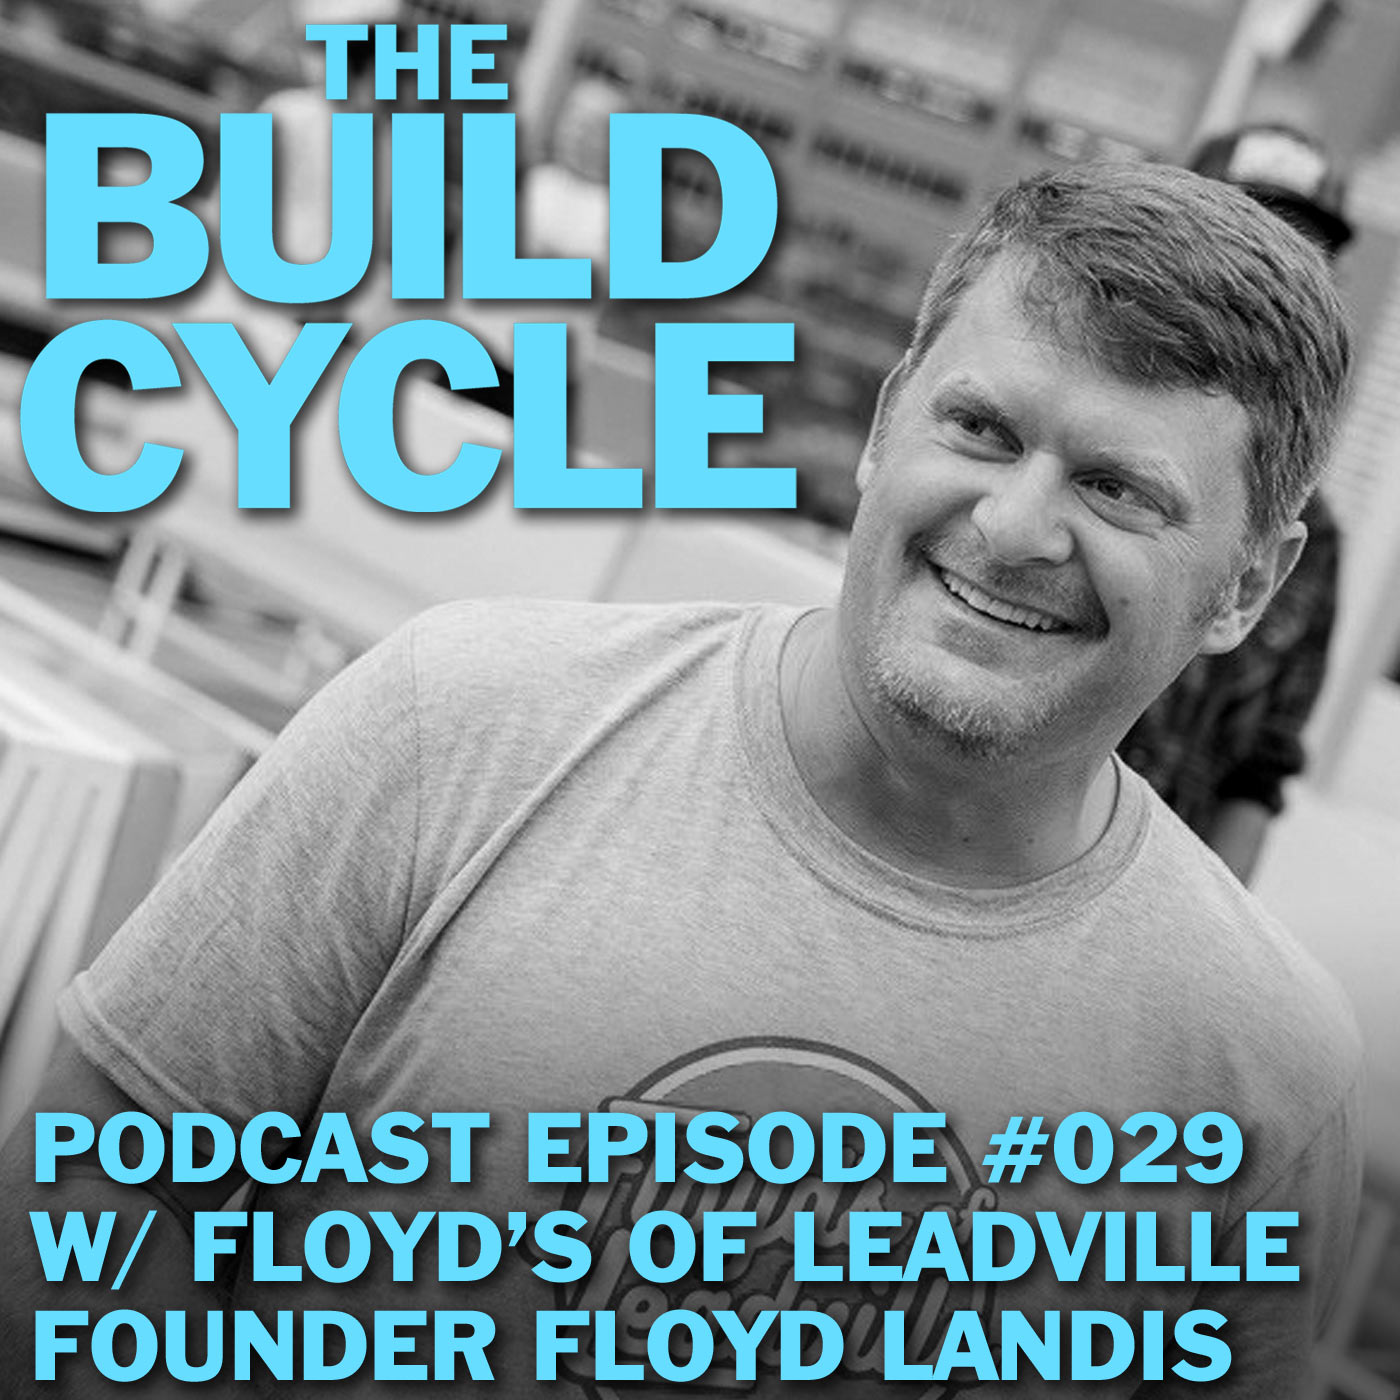 Ep #029 - Bouncing Back from Failure w/ Floyd's of Leadville founder Floyd Landis